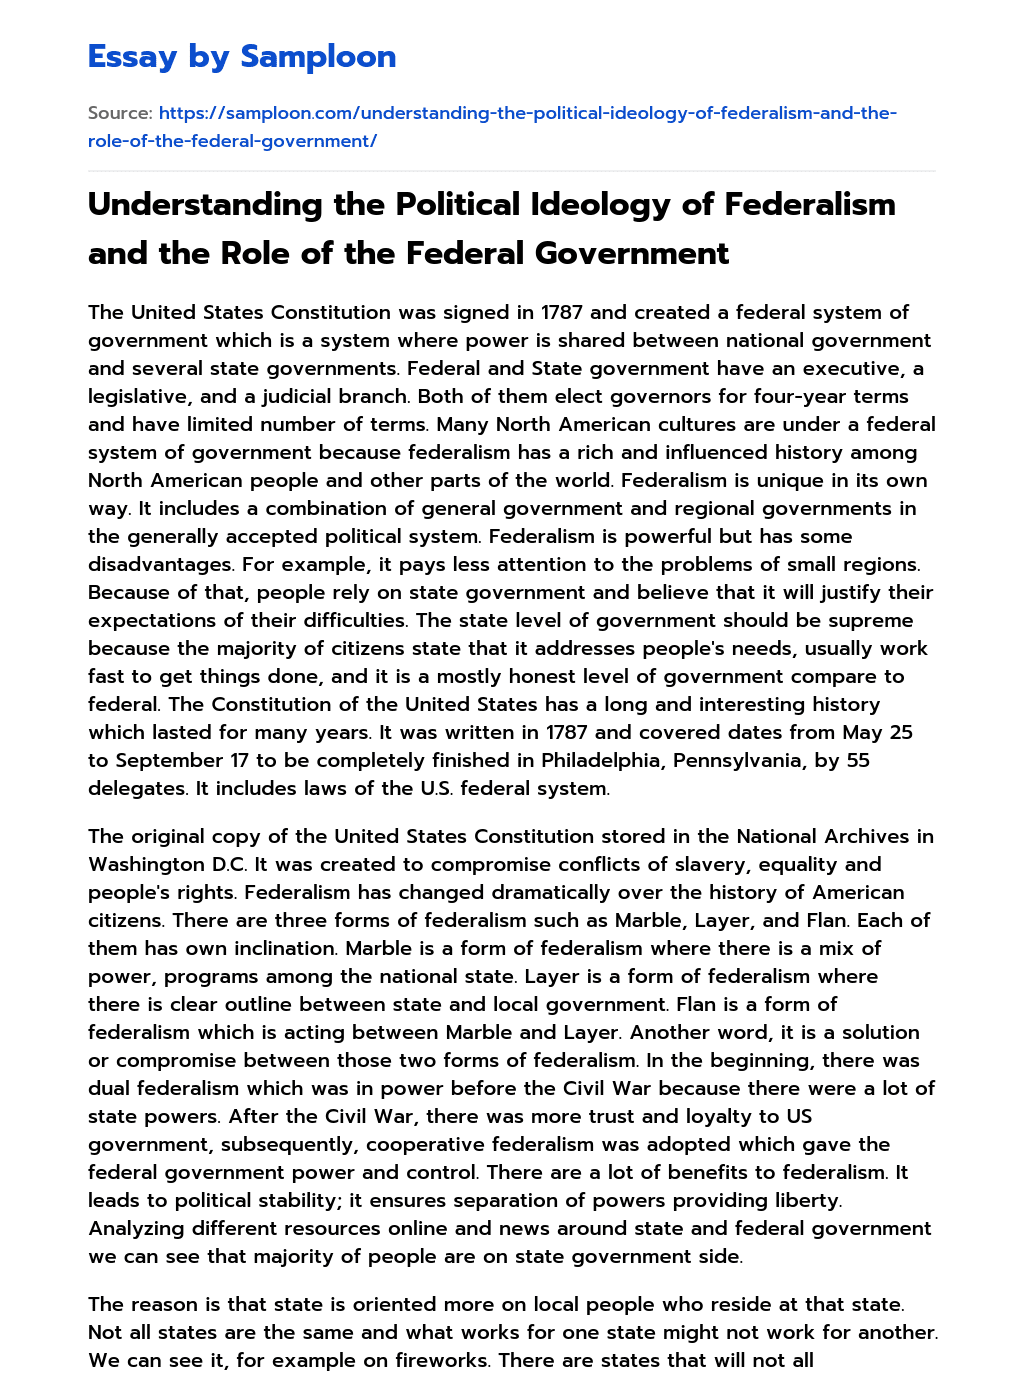 Understanding the Political Ideology of Federalism and the Role of the Federal Government essay